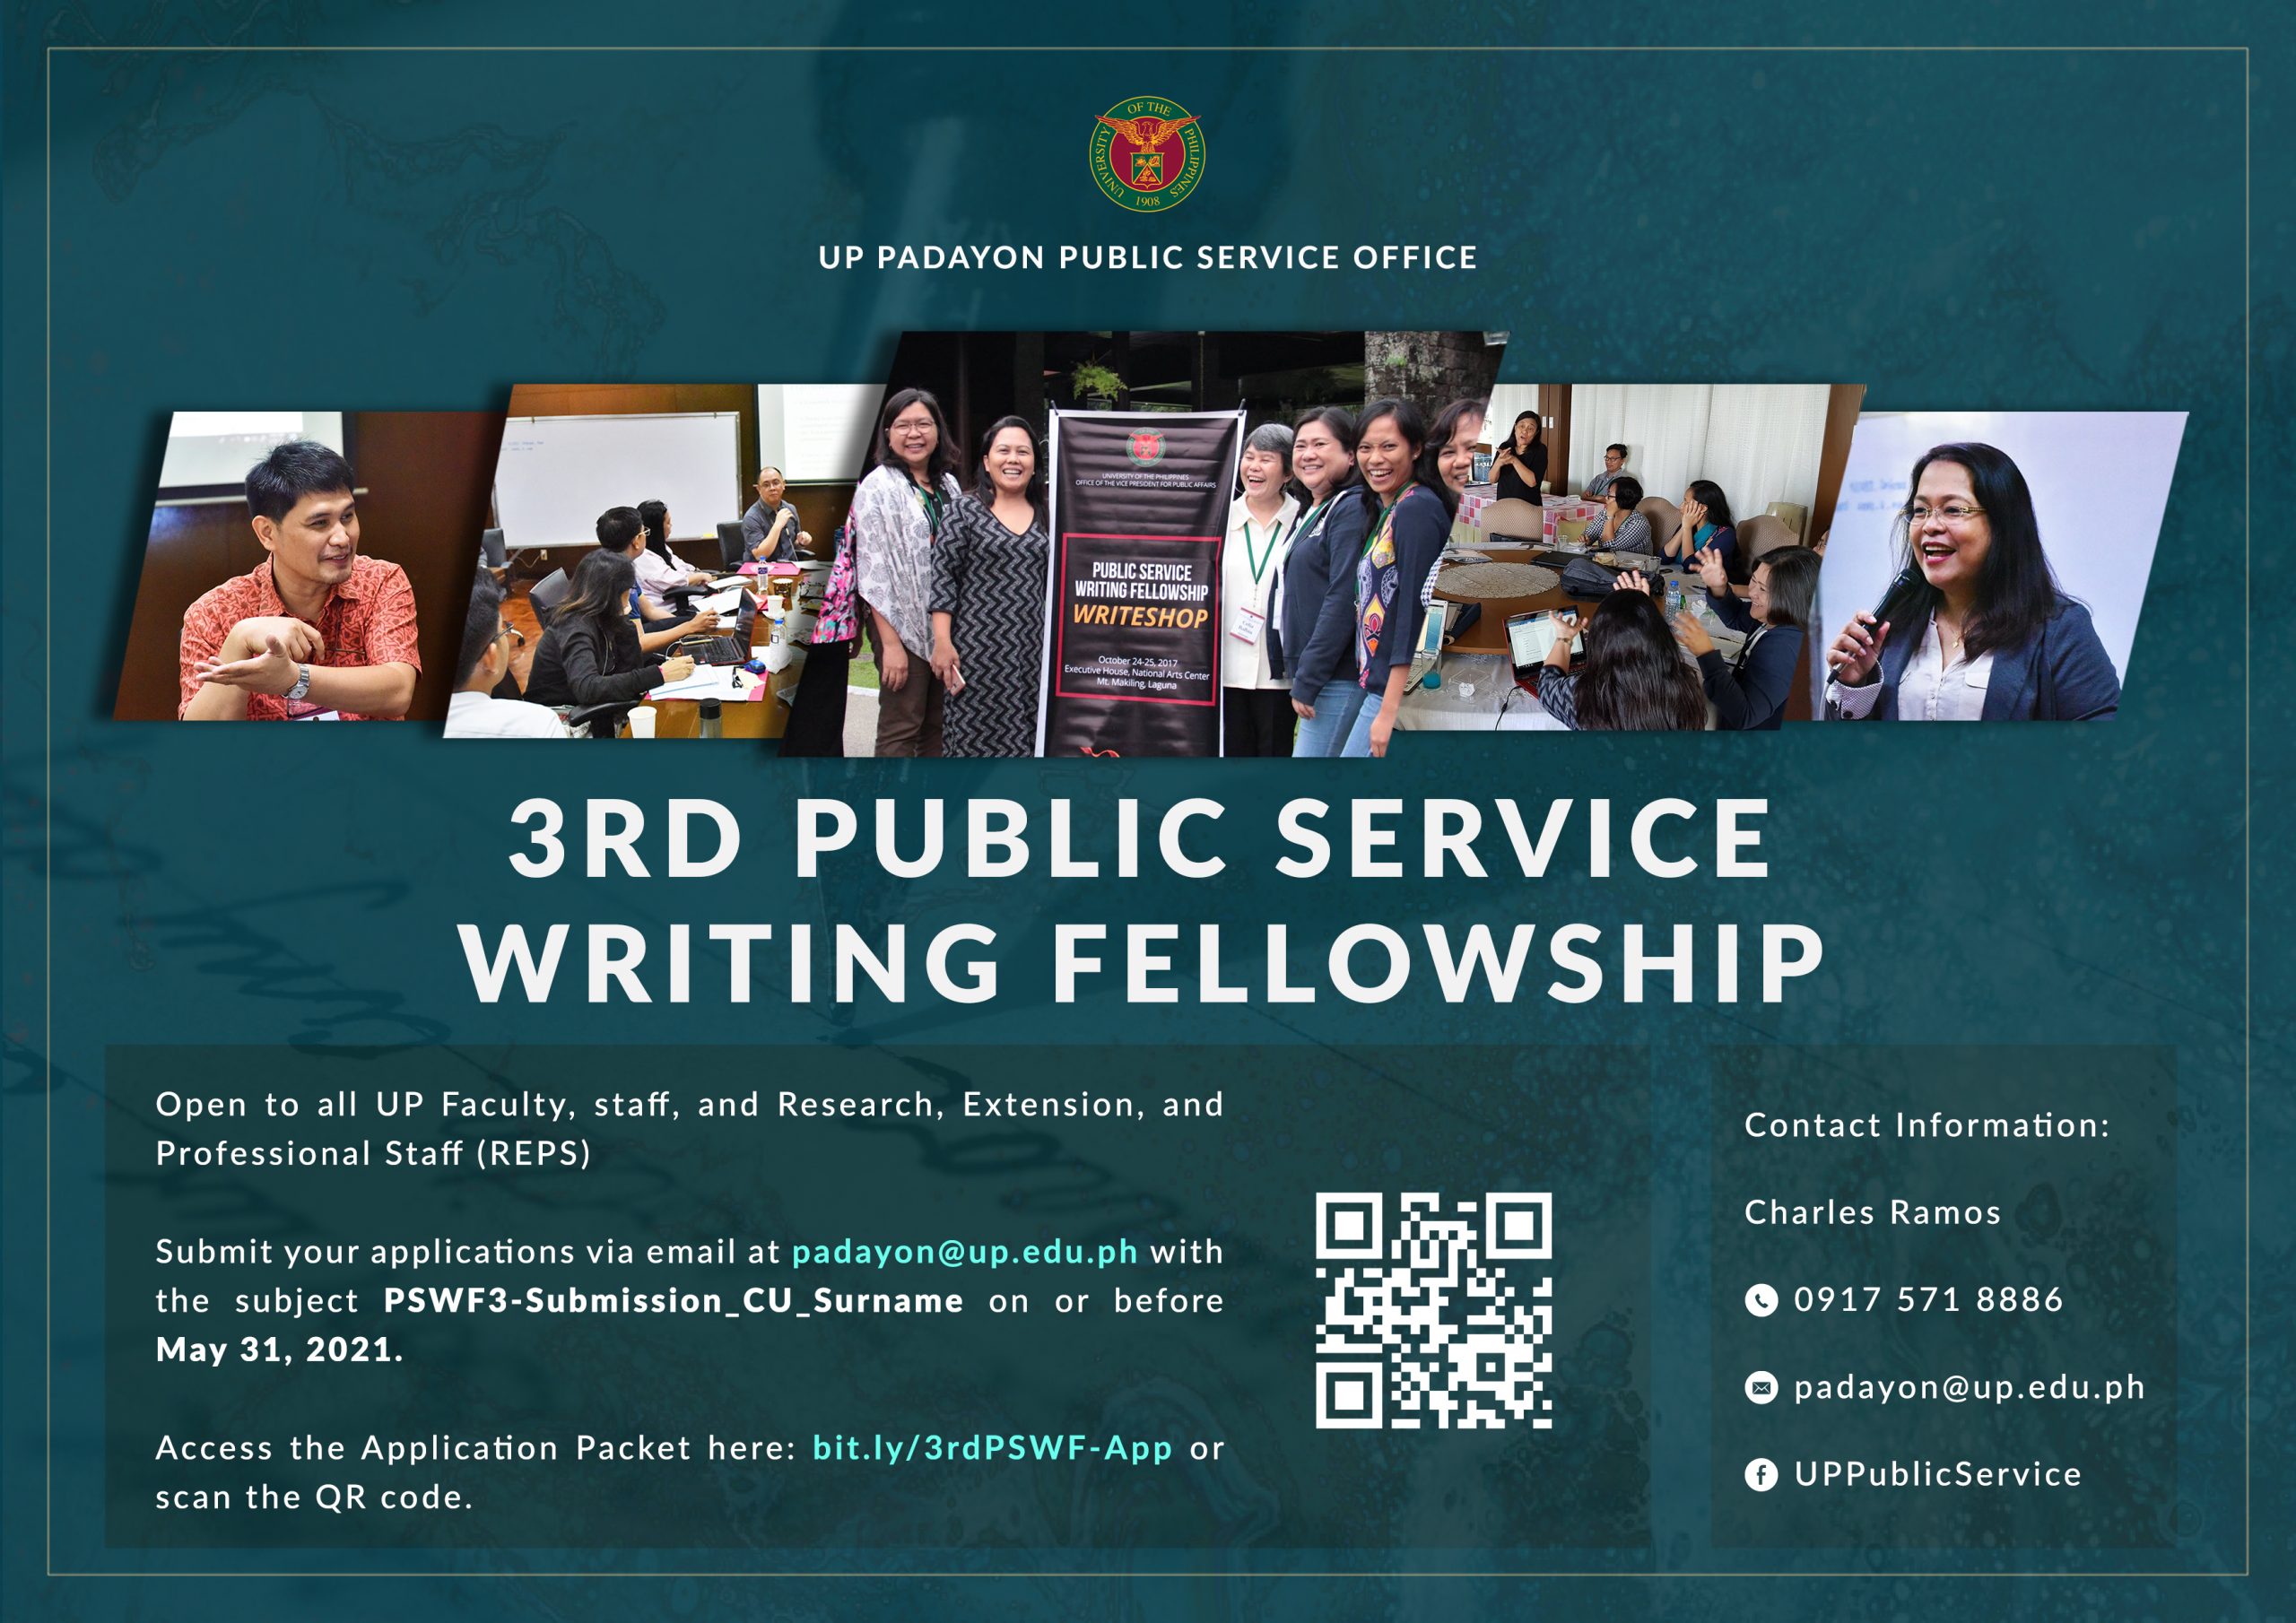 The UP Padayon Public Office Invites Faculty Members and REPS to the 3rd Public Service Writing Fellowship